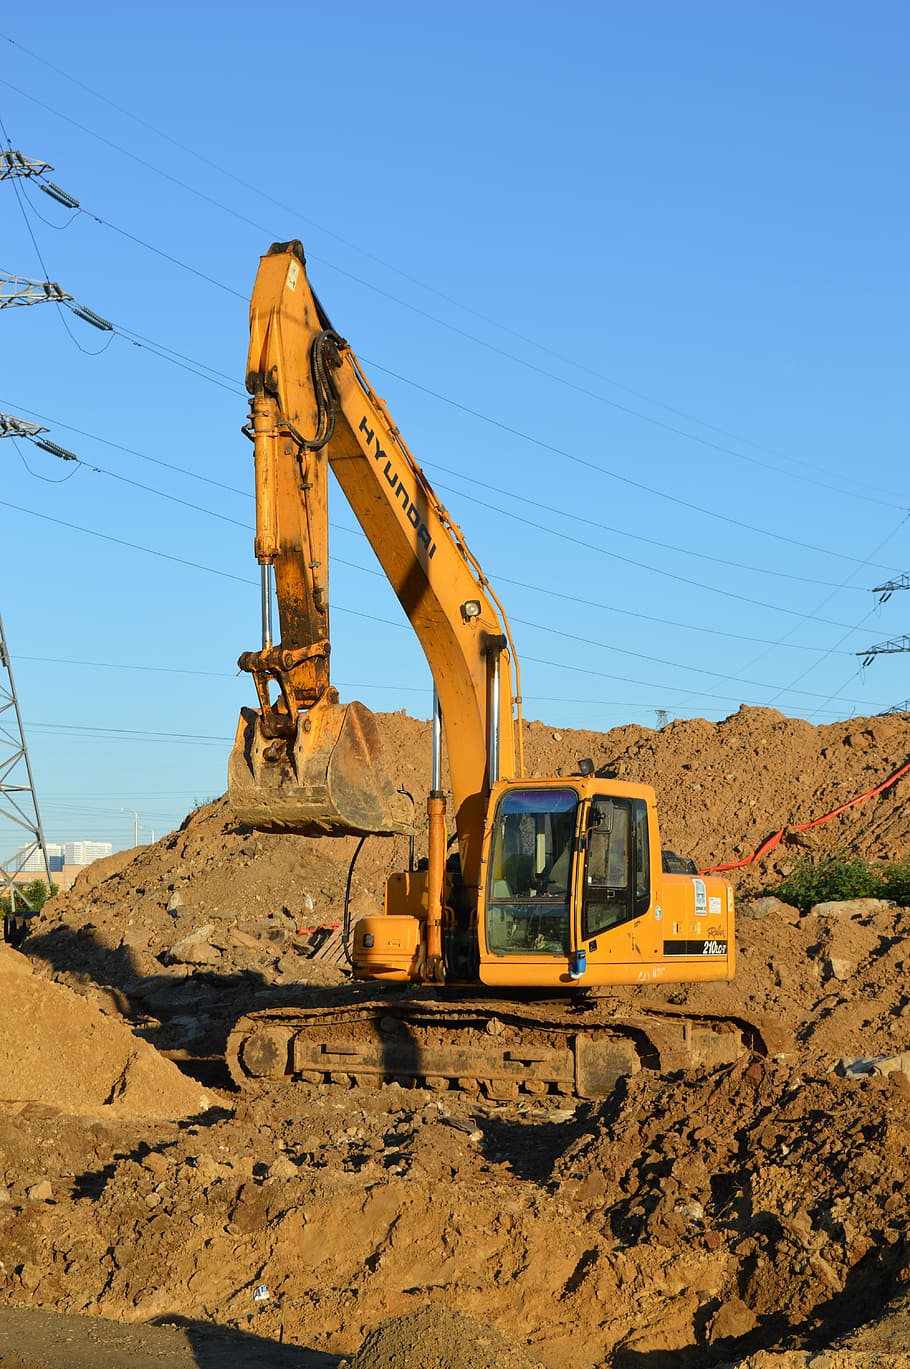 excavator, construction equipment, excavator digs, sand, special machinery, bucket, road repair, building an object, tractor, tractor digging